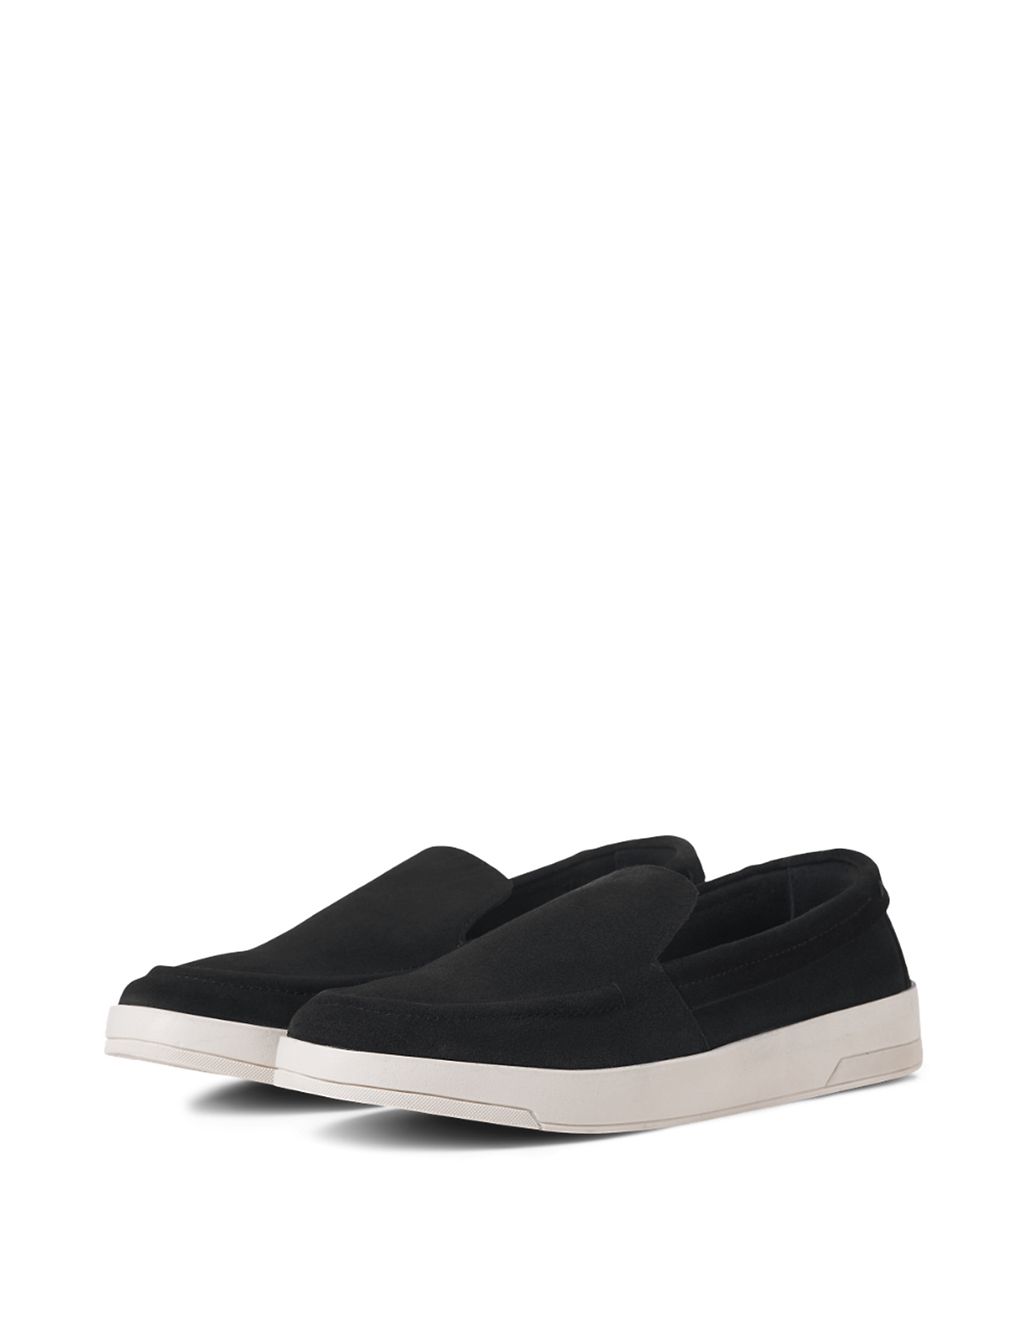 Suede Slip-On Loafers 1 of 4